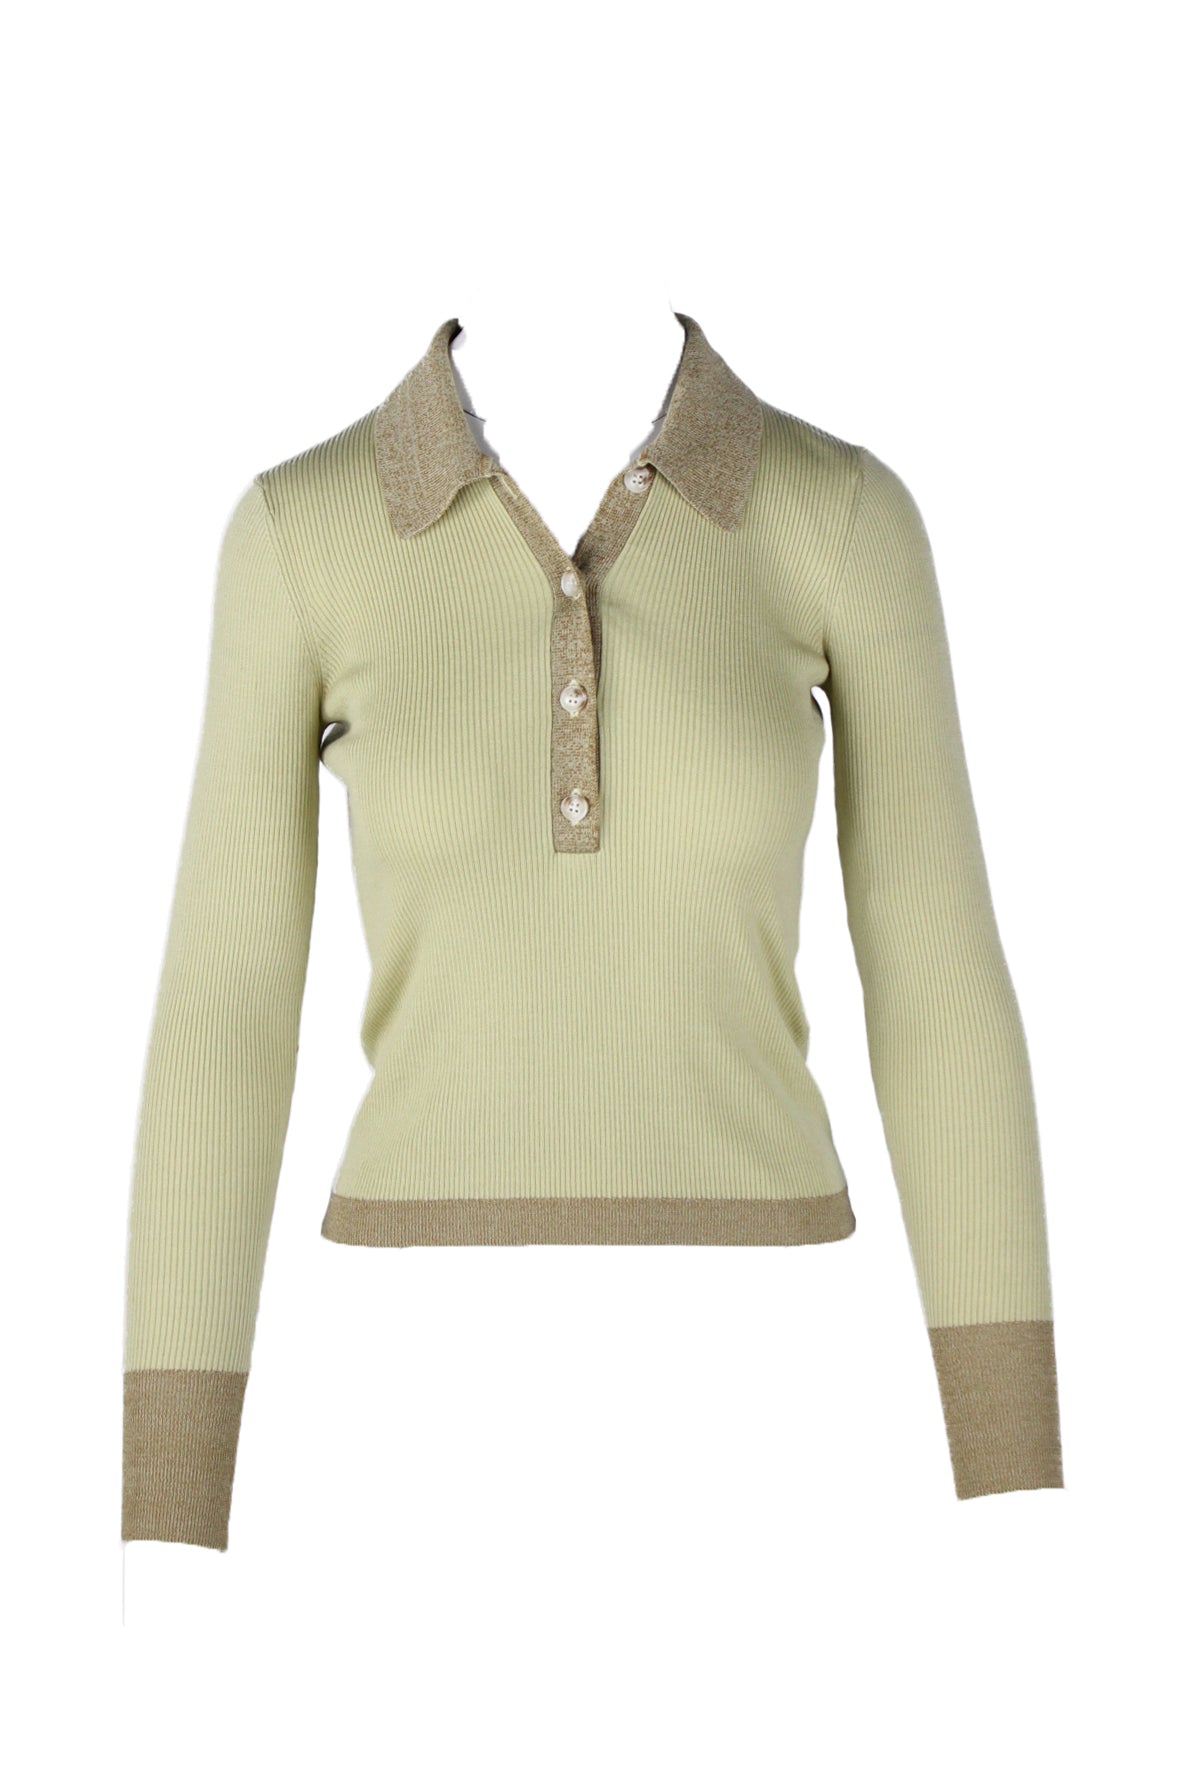 front angle of baum und pferdgarten light green and oatmeal ribbed sweater. features four button half placket, pointed collar, long sleeves, small vertical rib throughout, and contrast trim on collar/cuffs/hem. 